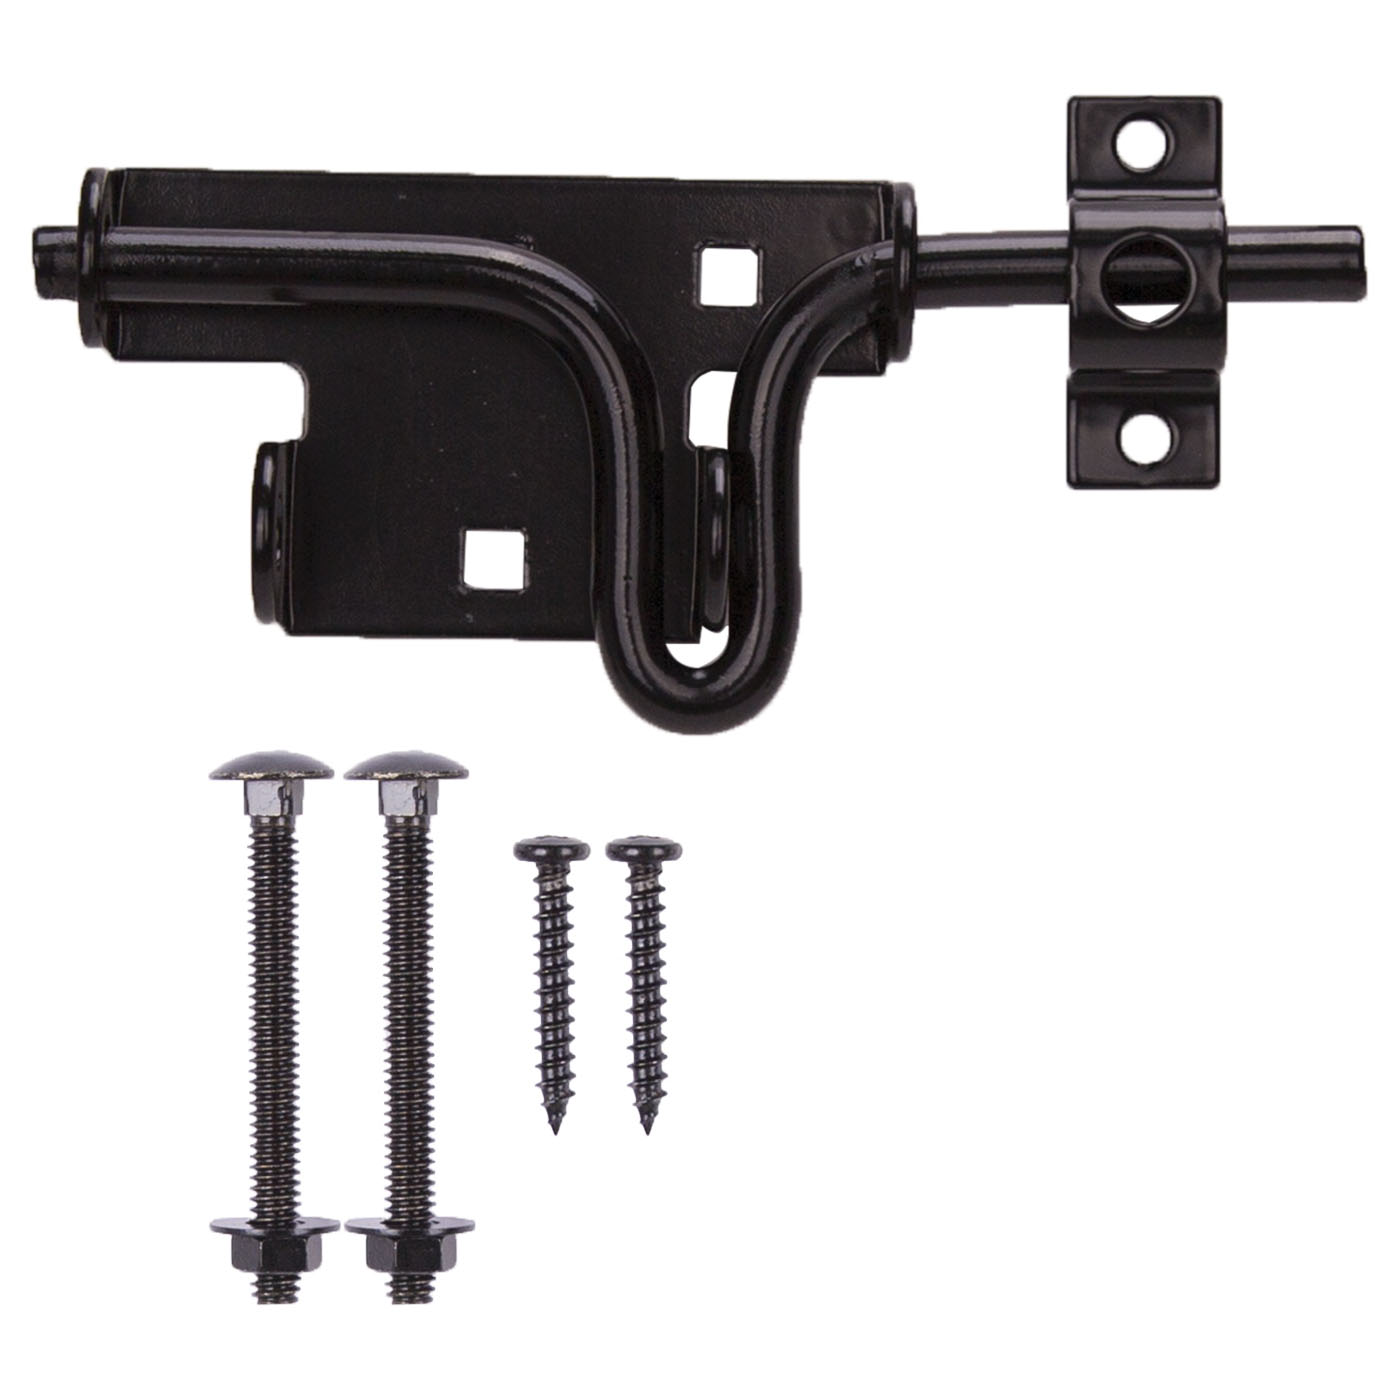 33189PKS-PS Bolt Latch, 1-1/8 in Bolt Head, 6-1/2 in L Bolt, Steel, Powder-Coated